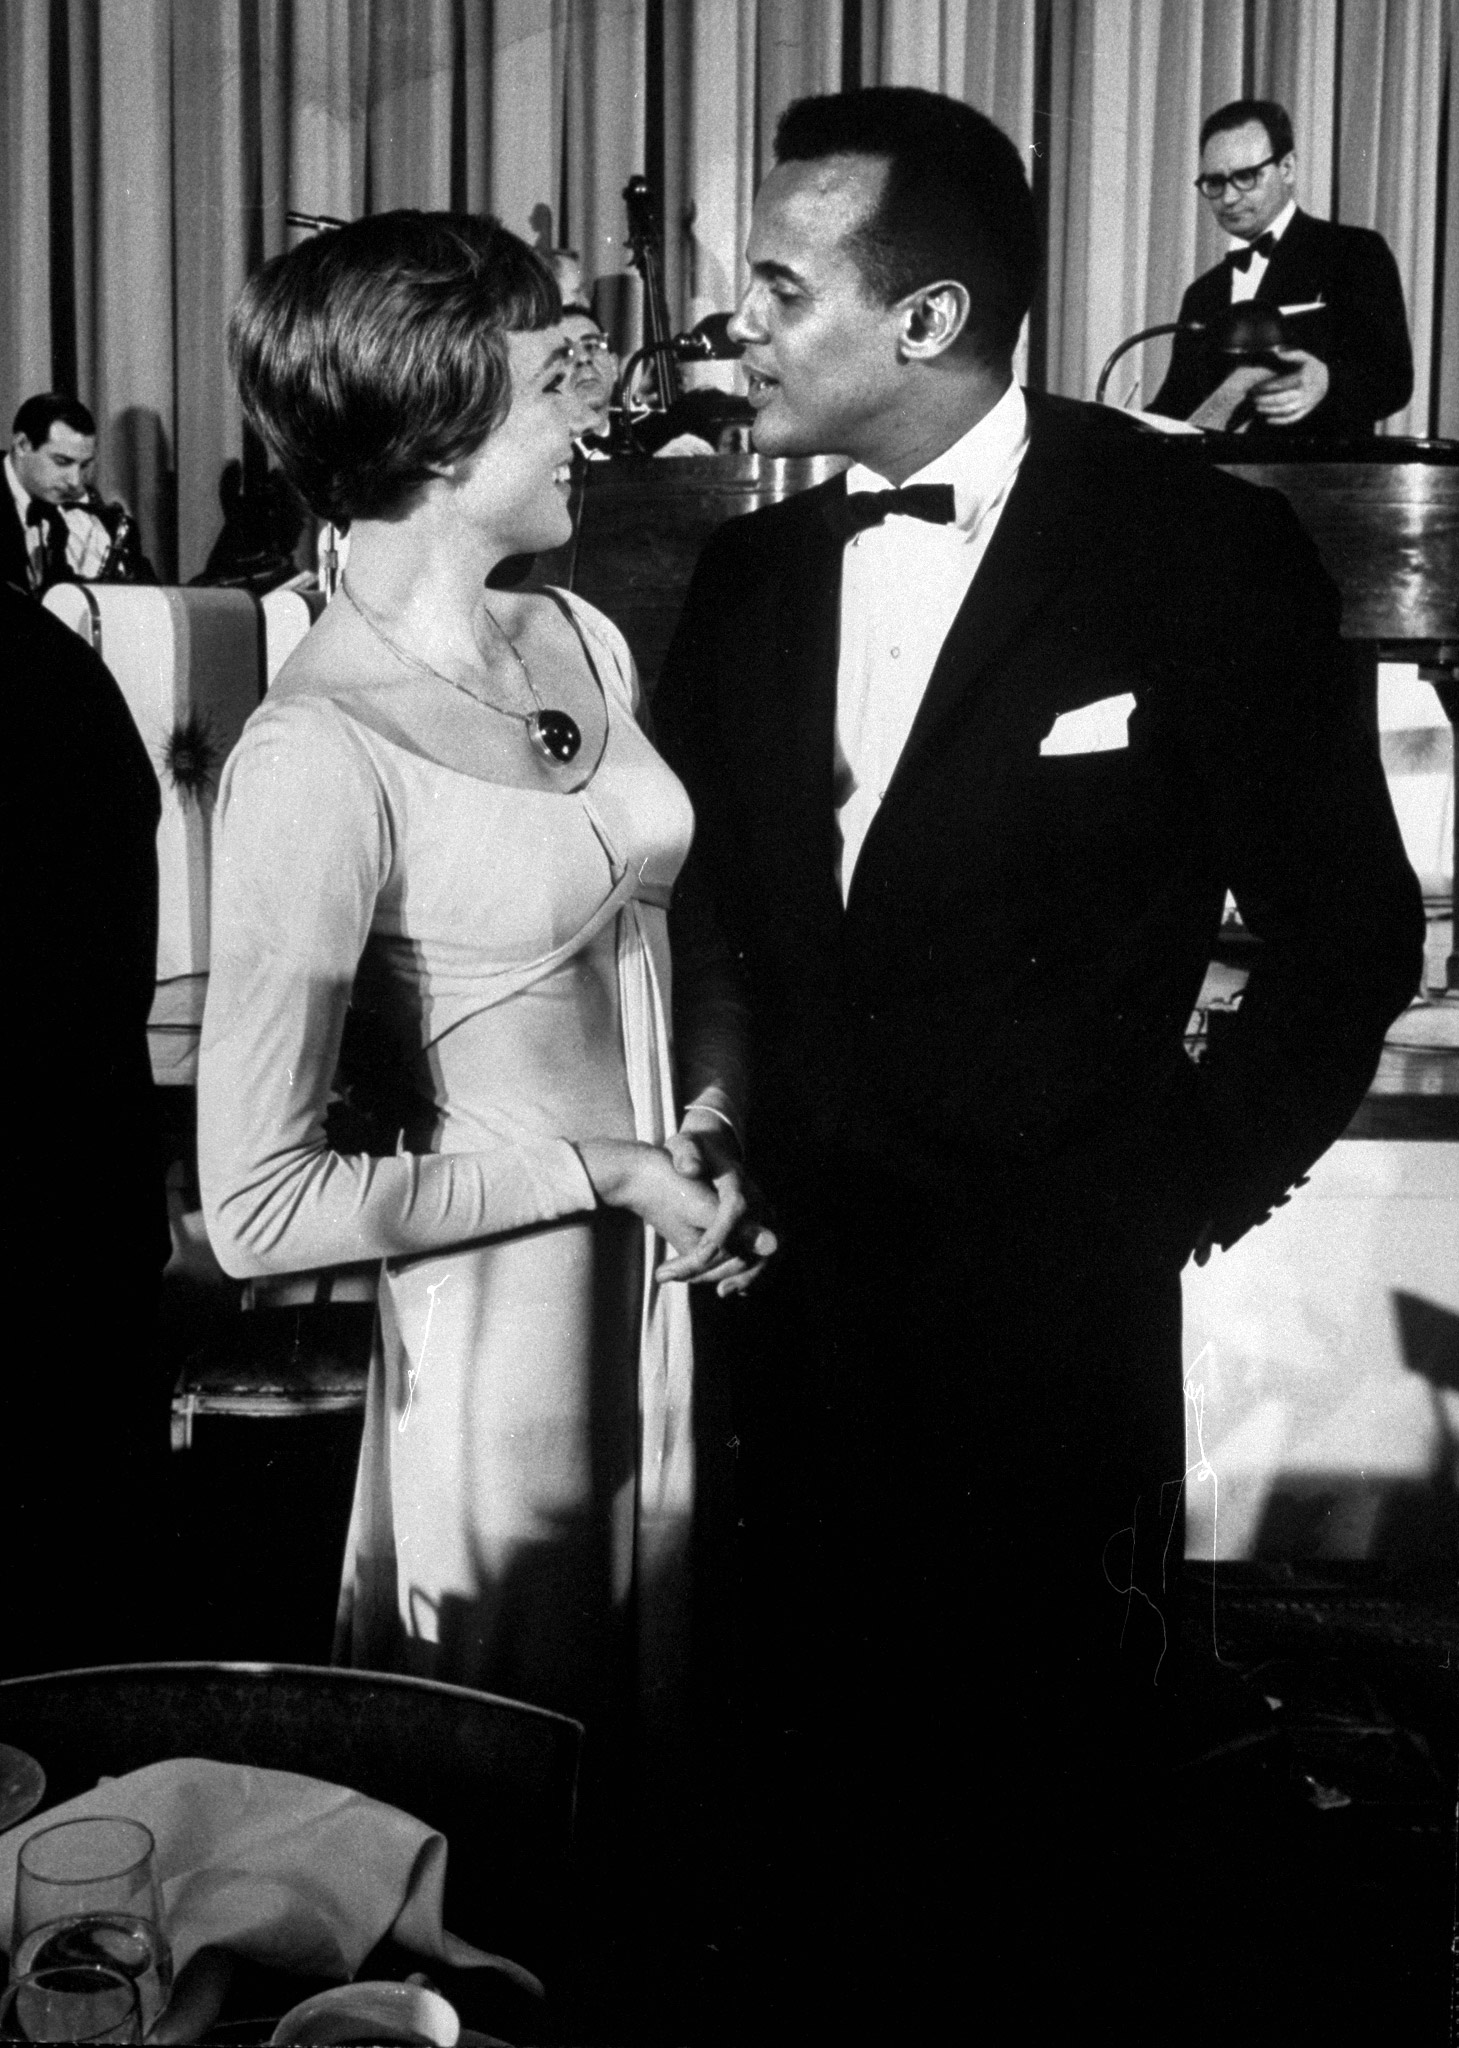 Singer Harry Belafonte with Julie Andrews at party following Broadway premiere of 'Sound of Music'.